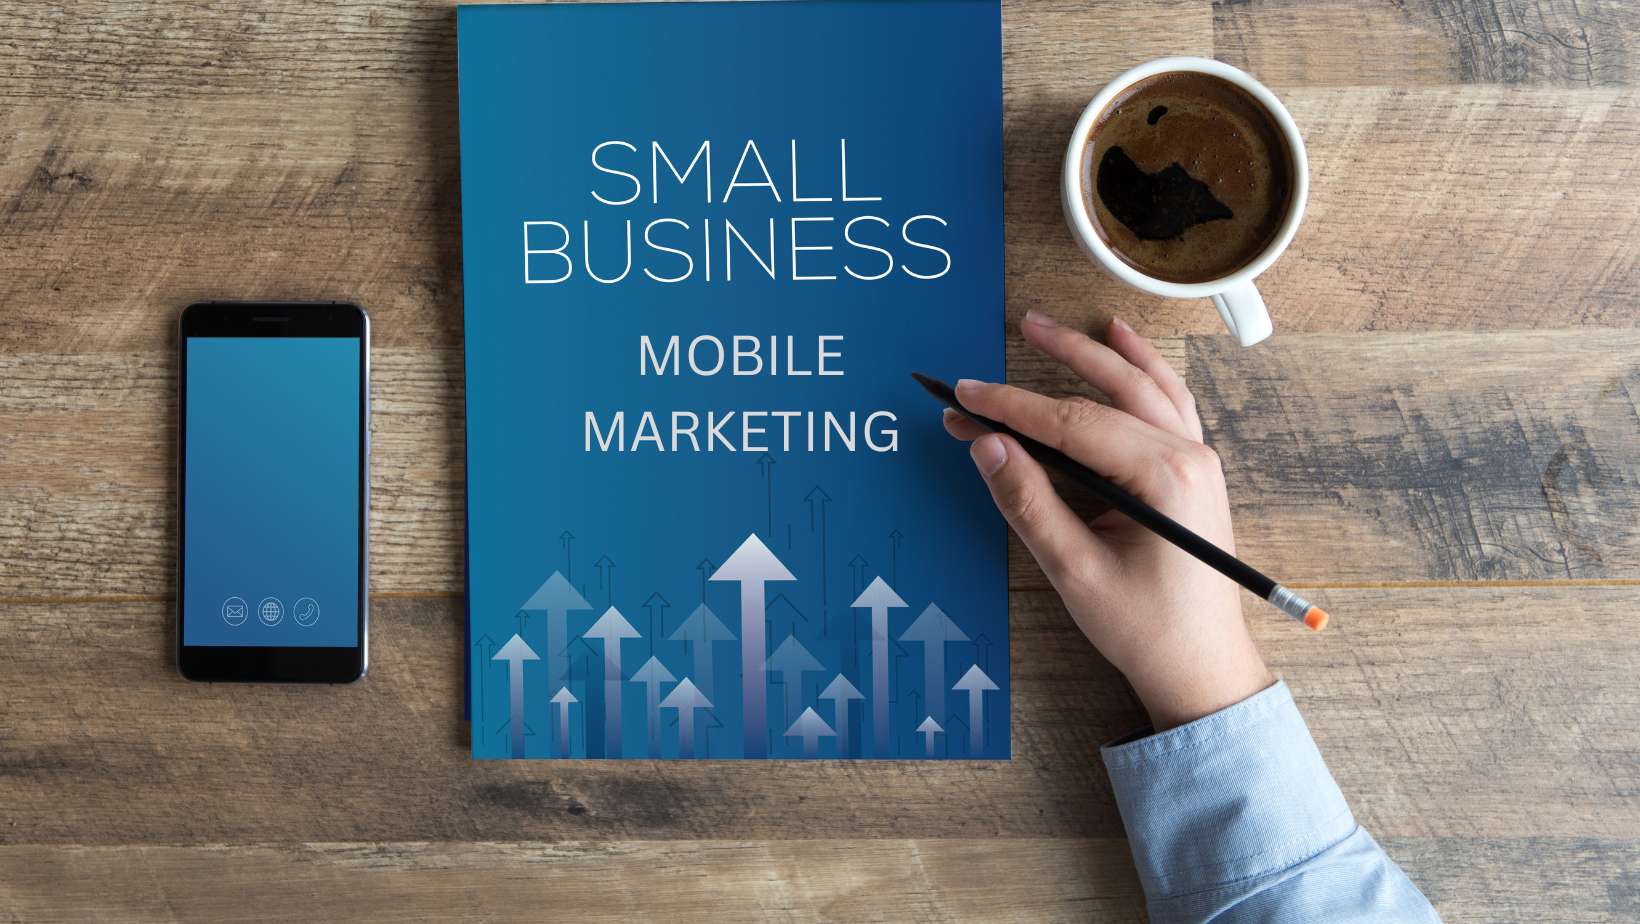 How to do Mobile Marketing for Small Business